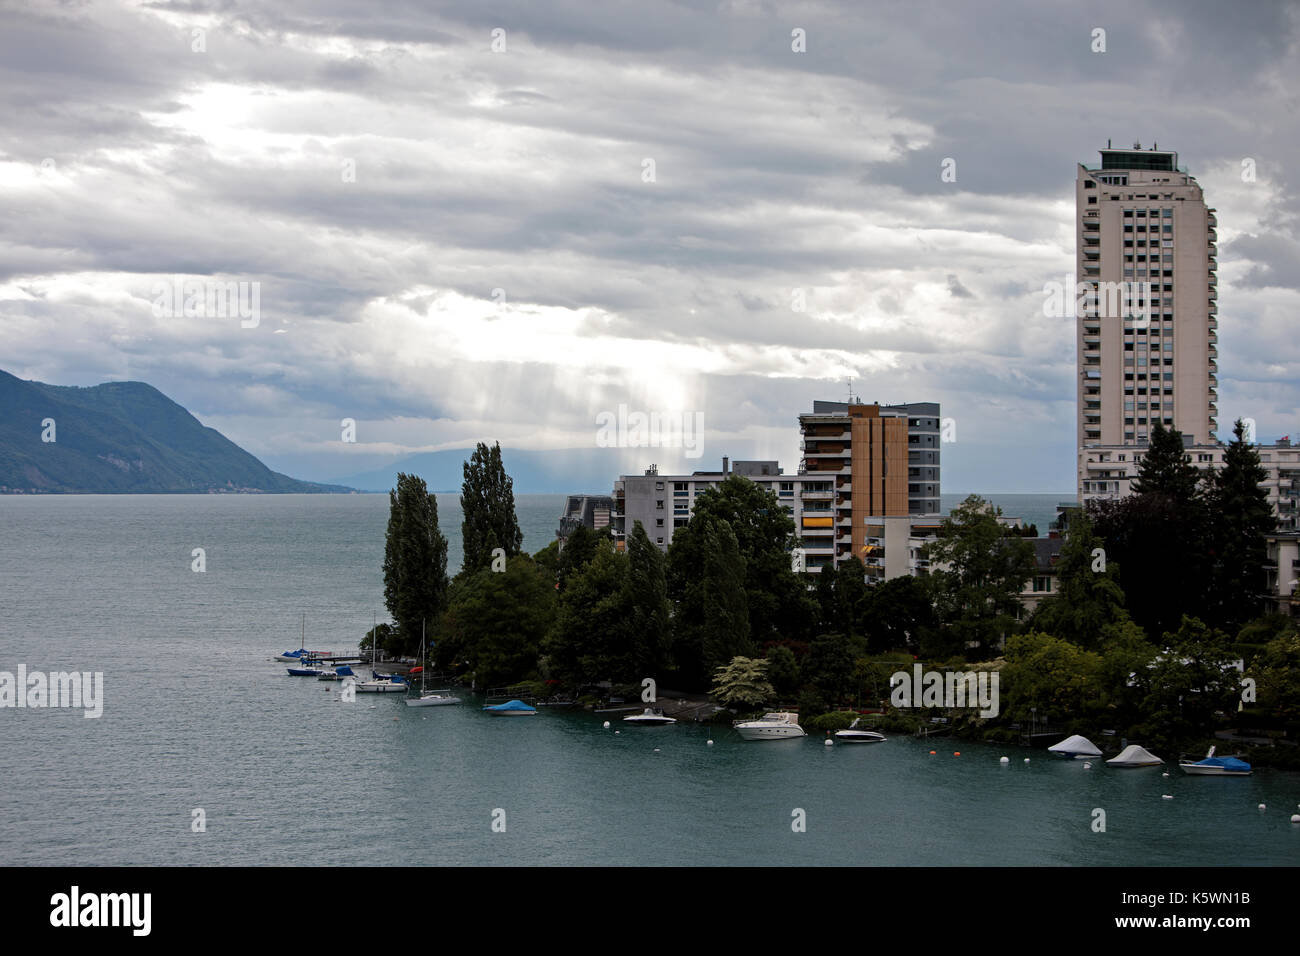 High rise apartment blocks in the center or Montreux on Lake Geneva in Switzerland. Boats and small yachts are moored up alongside the promenade with  Stock Photo